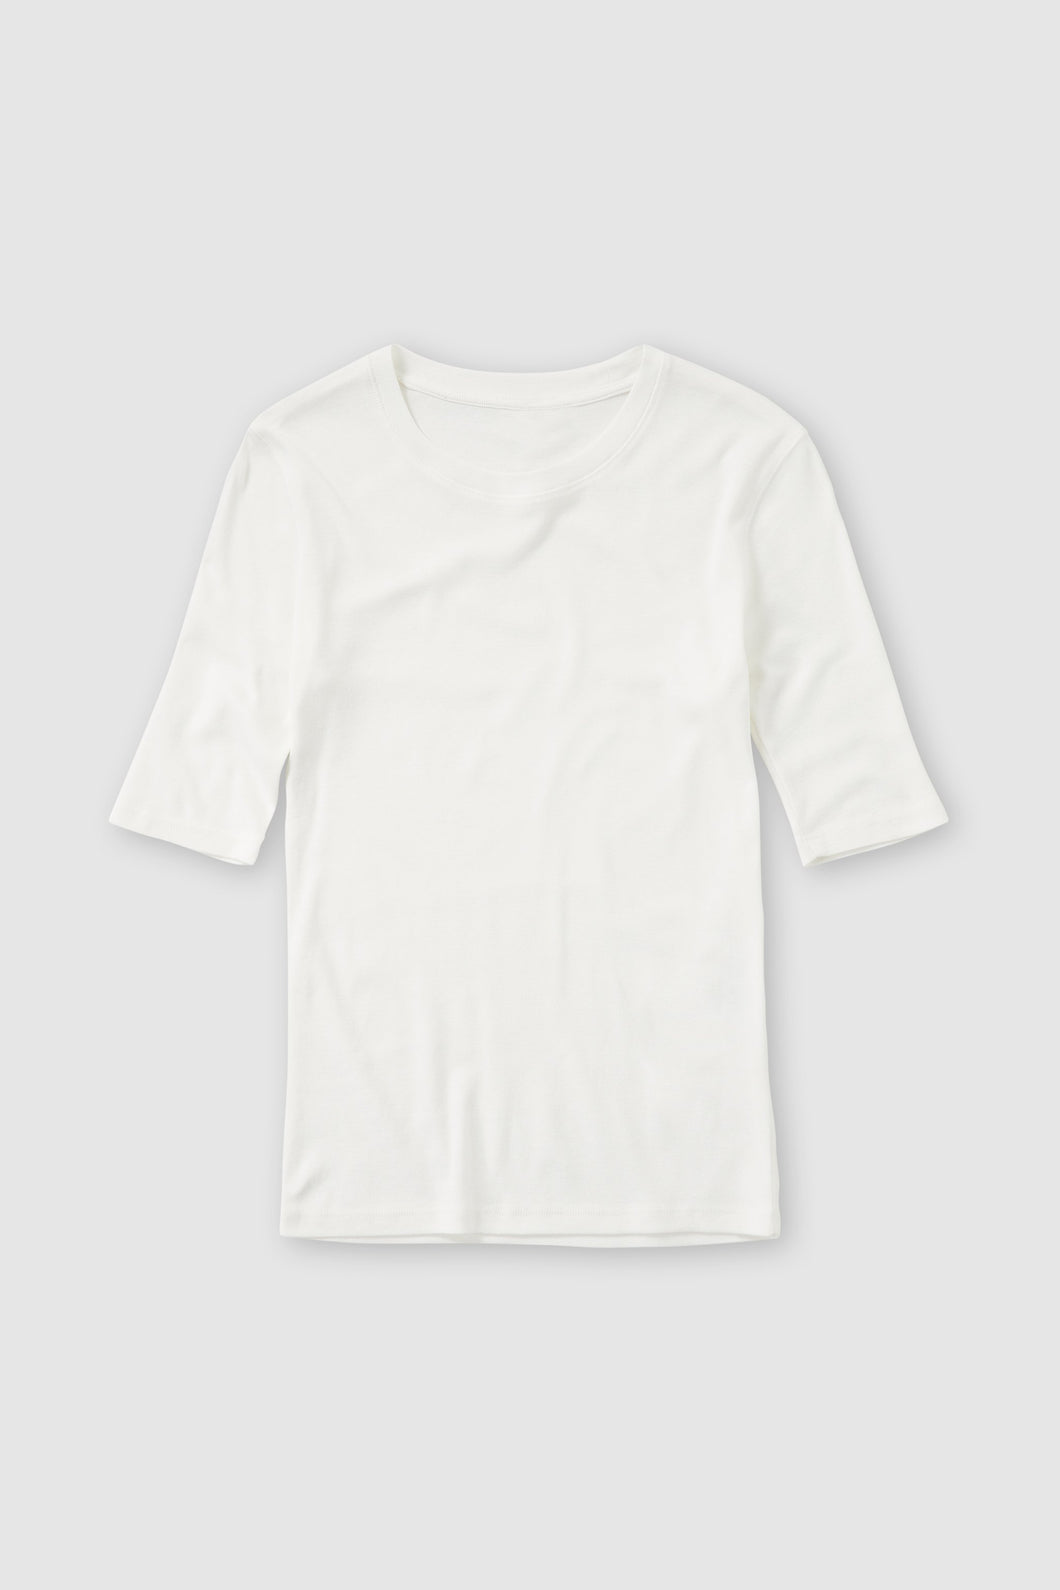 Closed Schmales T-Shirt